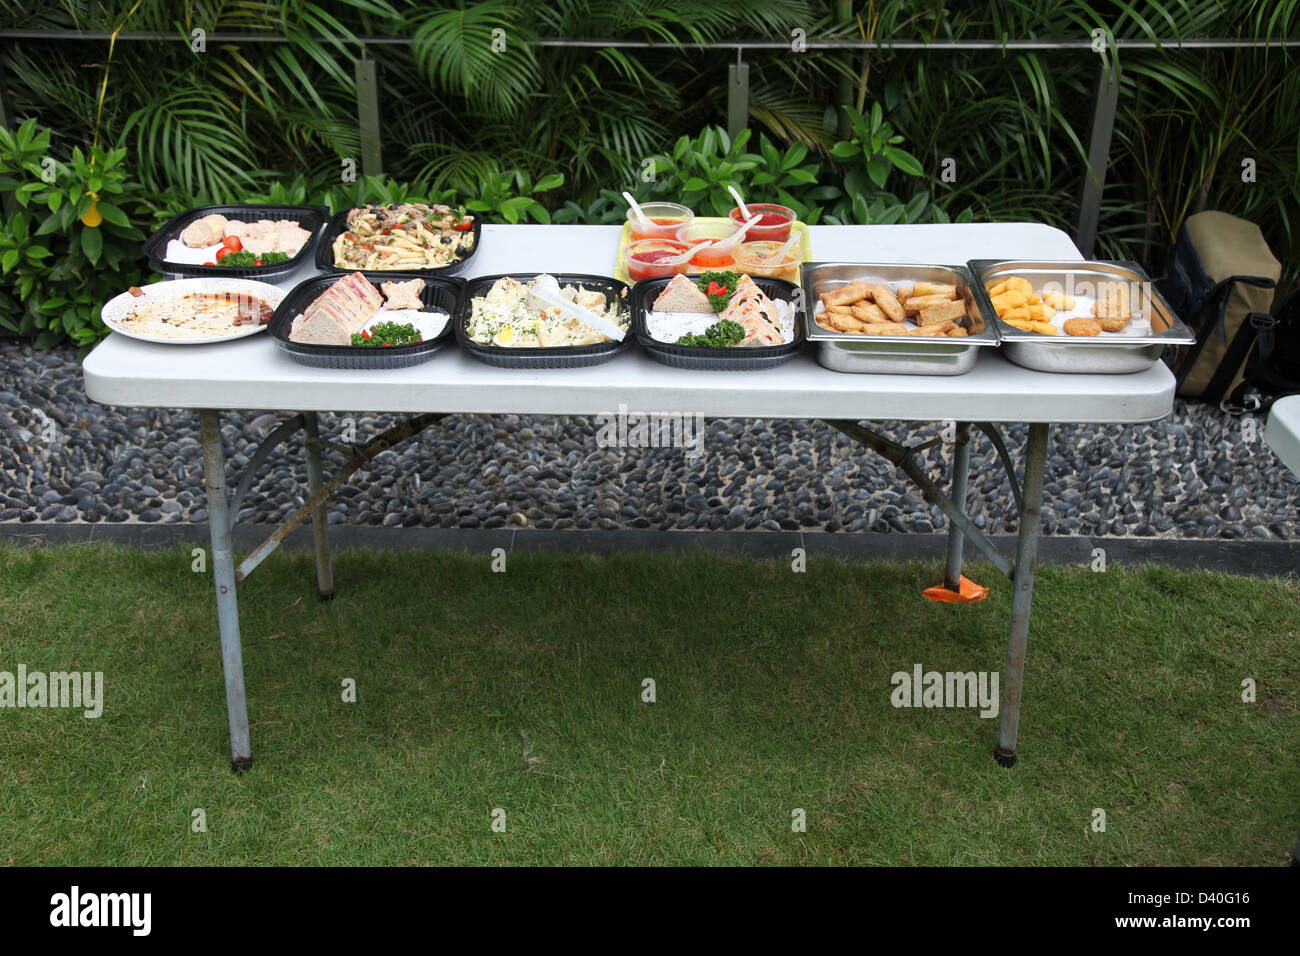 It's a photo of an outdoor table full of food for a buffet or a